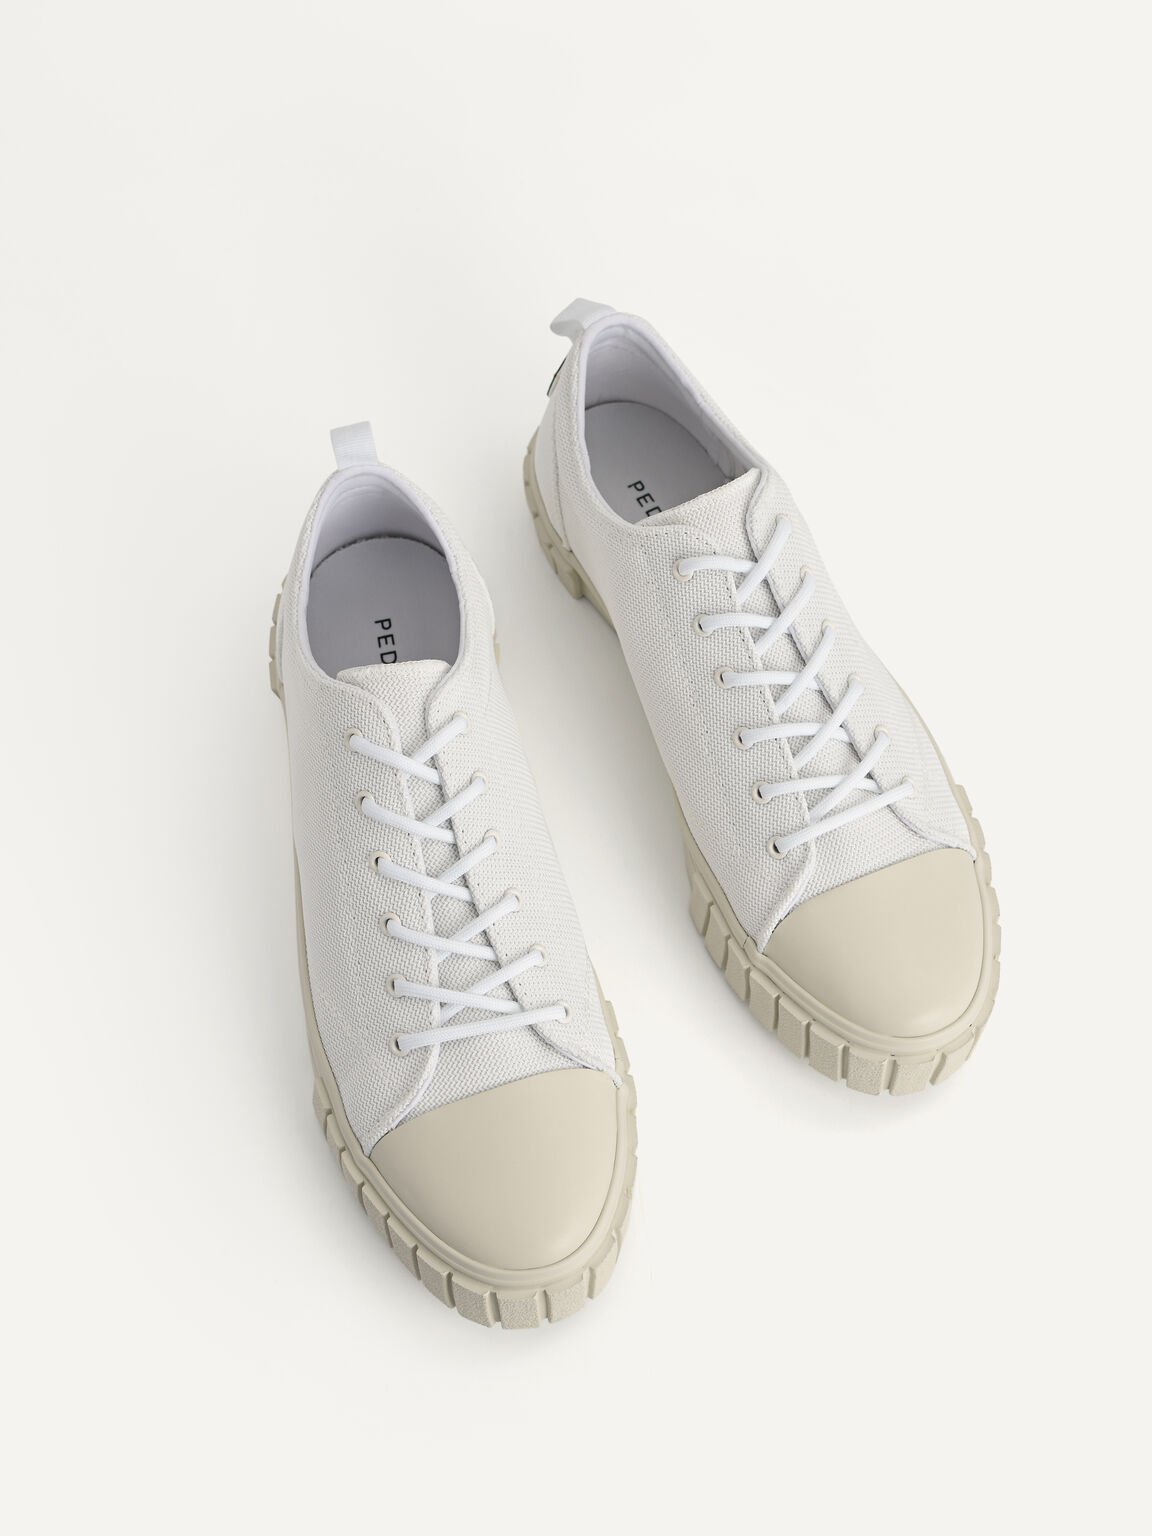 Beat Court Sneakers, White